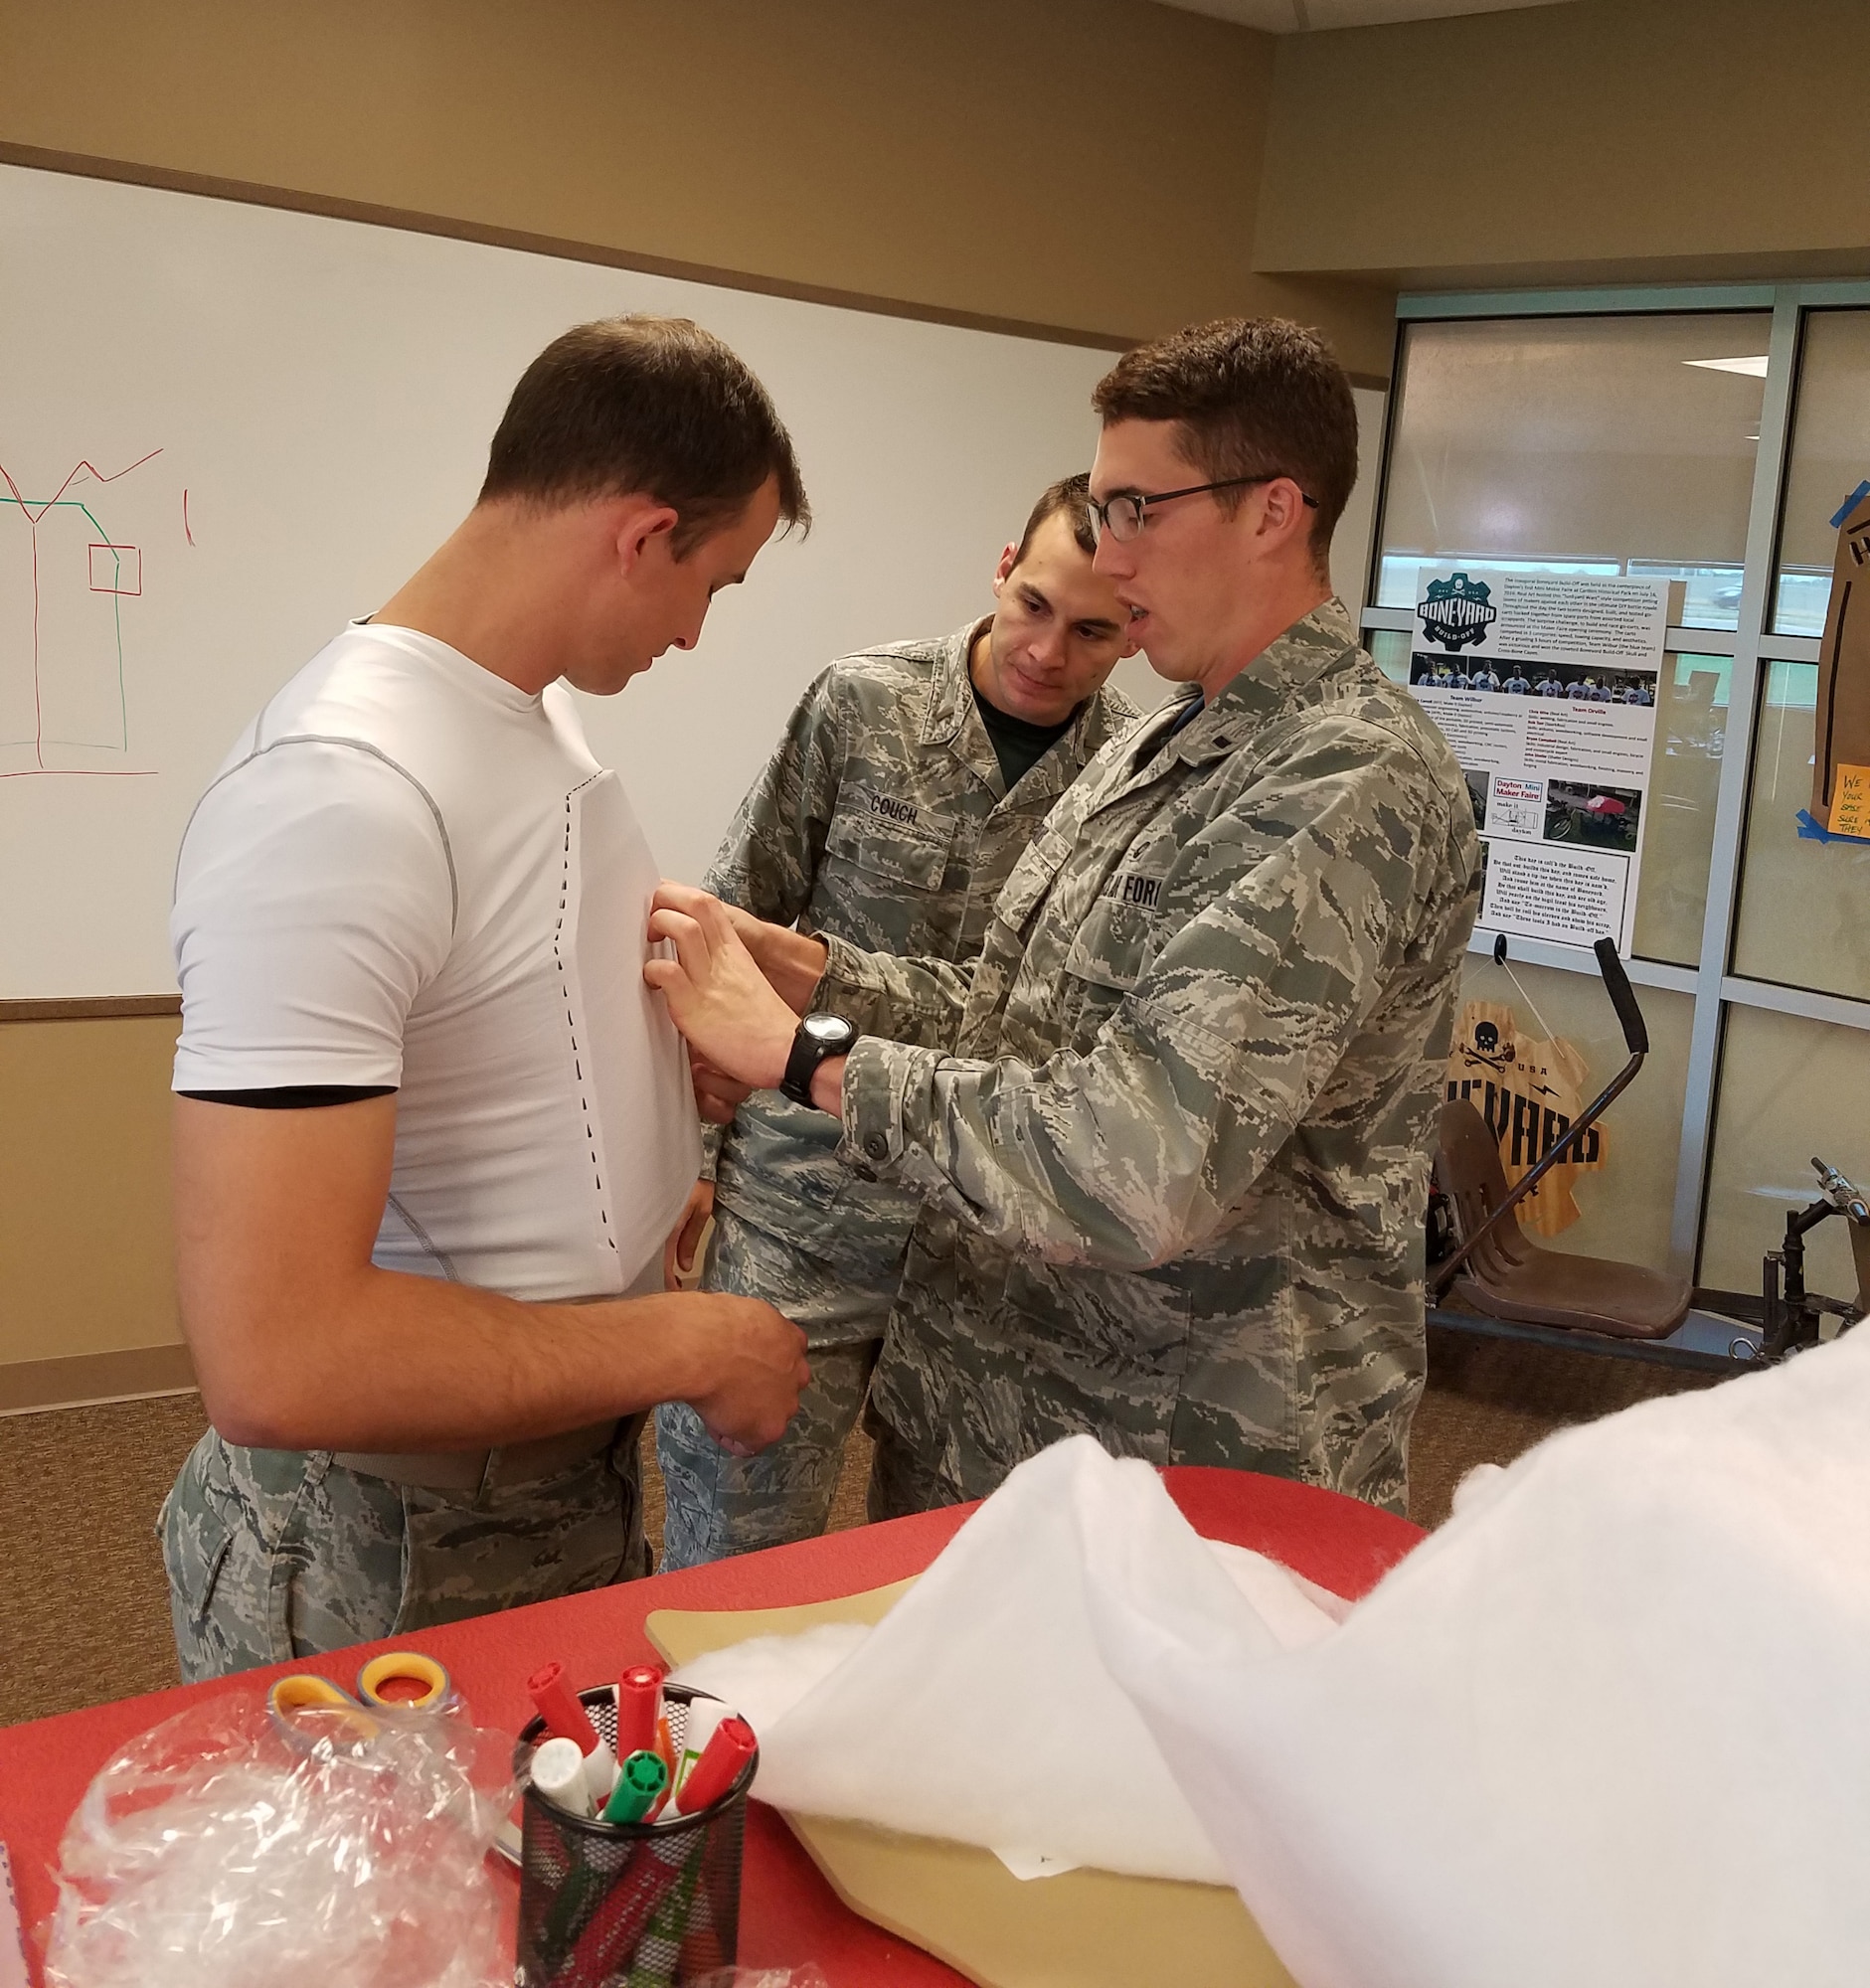 1st Lt. Jason Goins (right) and 2nd Lt. Mathew Couch fit the body armor prototype created in the AFRL Maker Hub to Capt. Lance Wilhelm, testing for wearability and body conformity.  (U.S. Air Force photo/Holly Jordan)